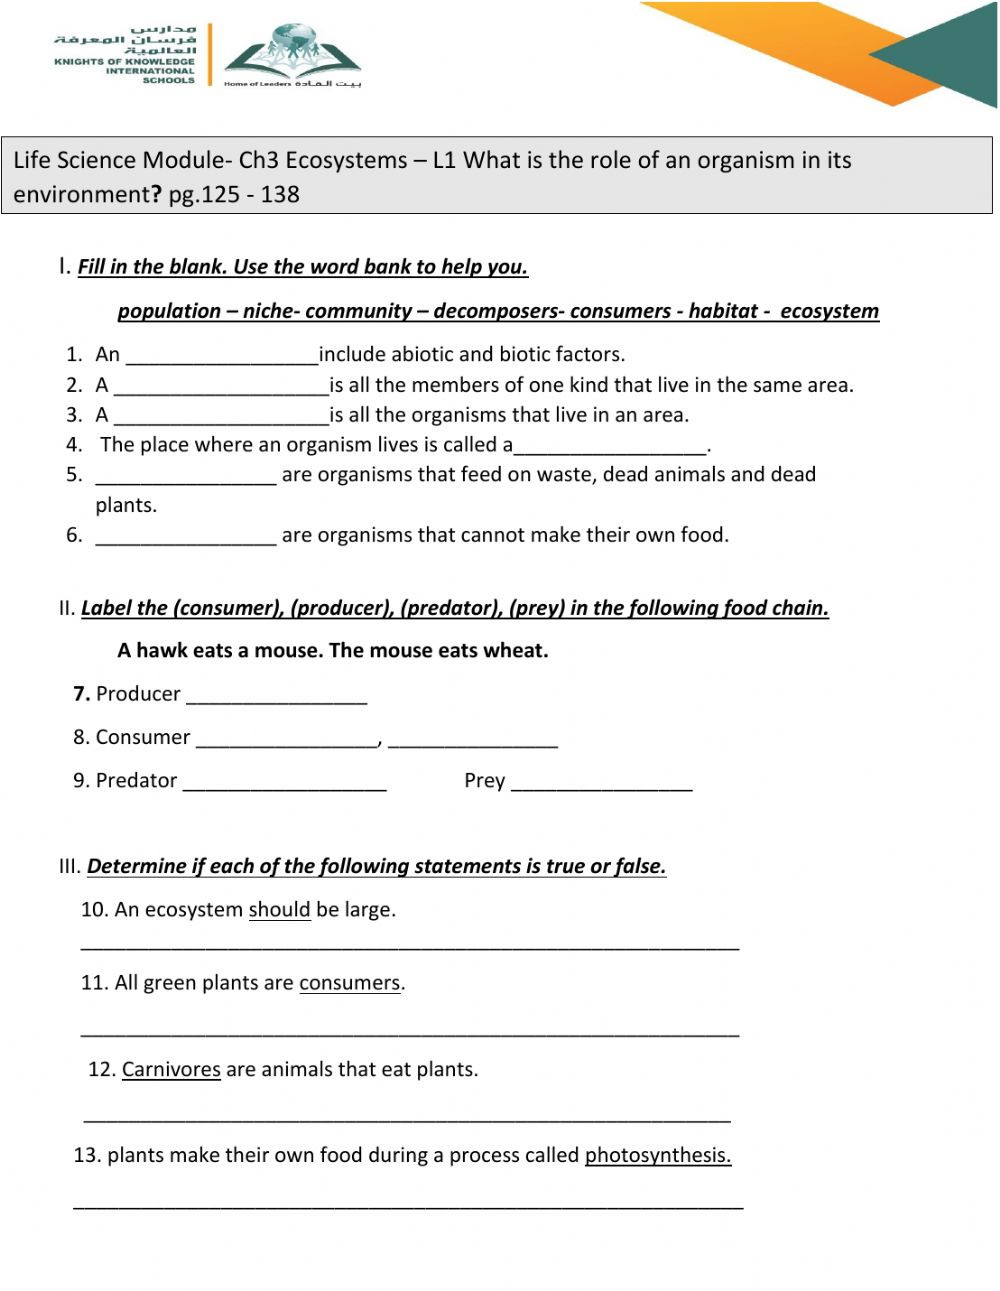 Abiotic and Biotic Factors Worksheet Ch3 L1 What S the Role Of An organism In Its Ecosystem